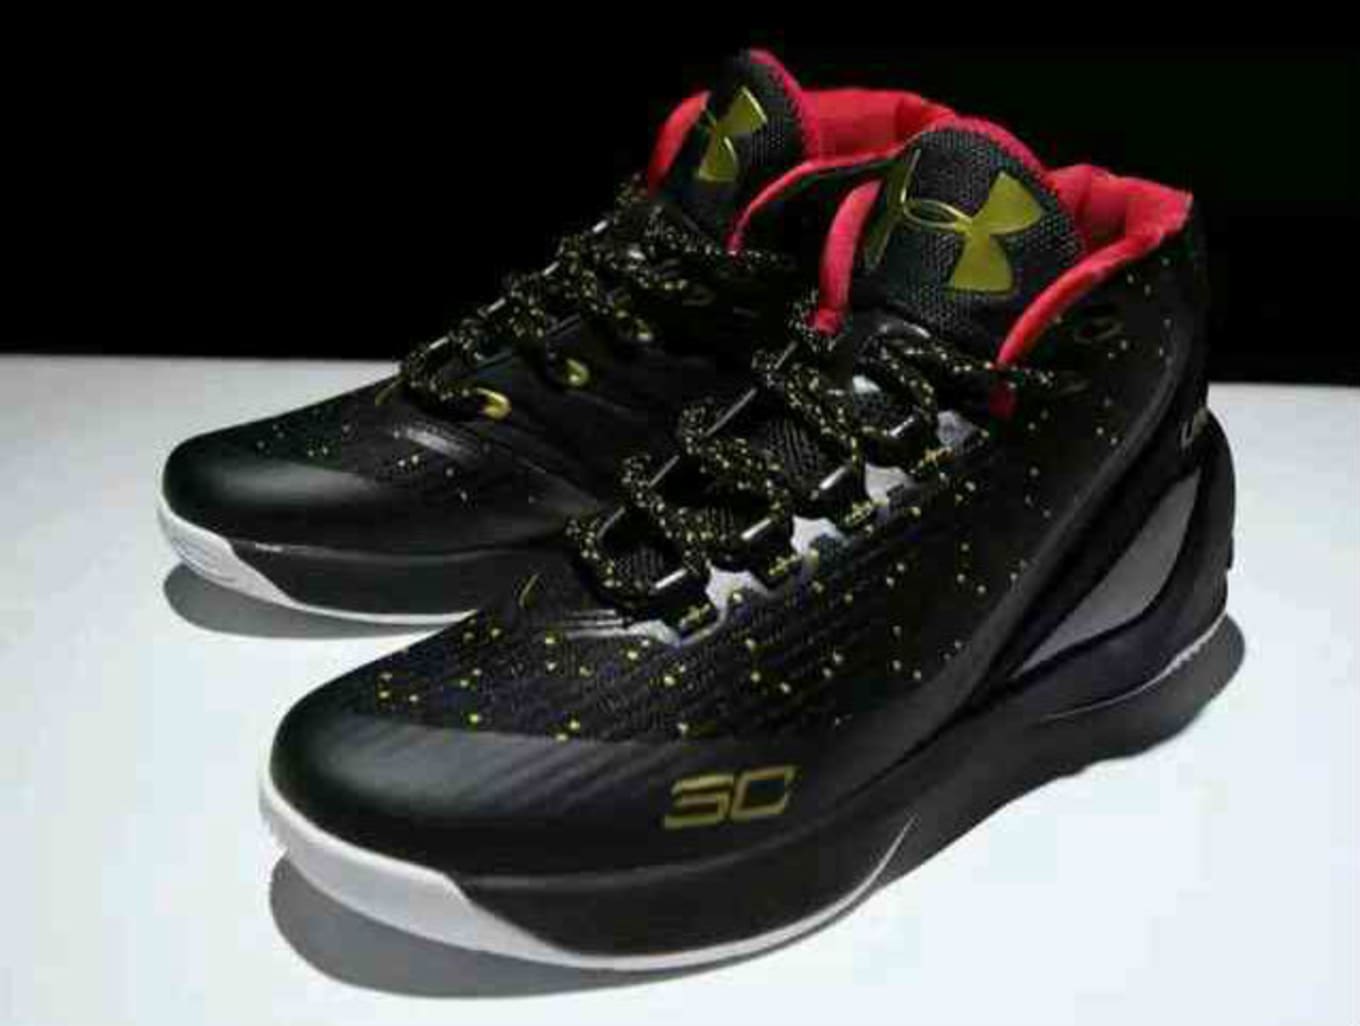 Under Armor Stephen Curry 30’s black and yellow court shoes ...